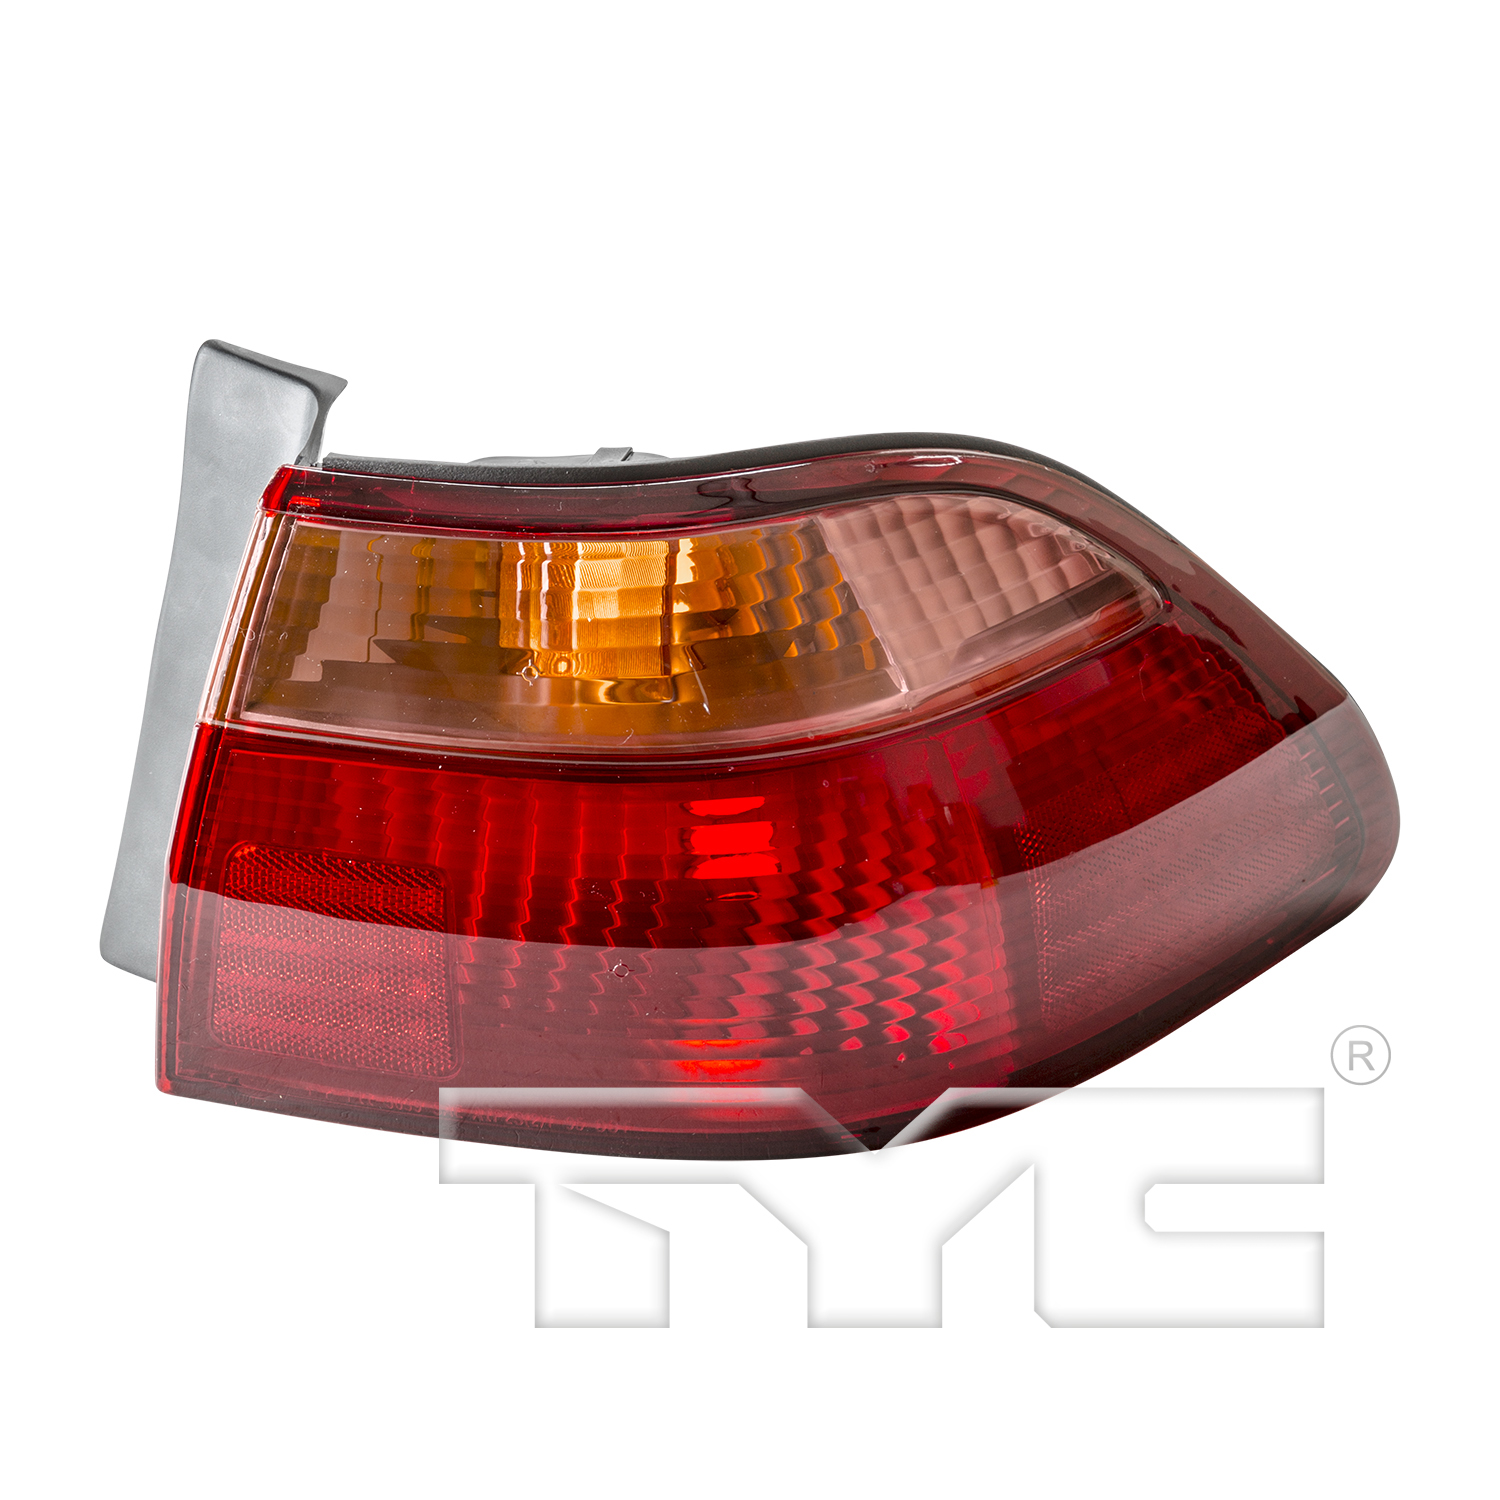 Aftermarket TAILLIGHTS for HONDA - ACCORD, ACCORD,98-00,RT Taillamp assy